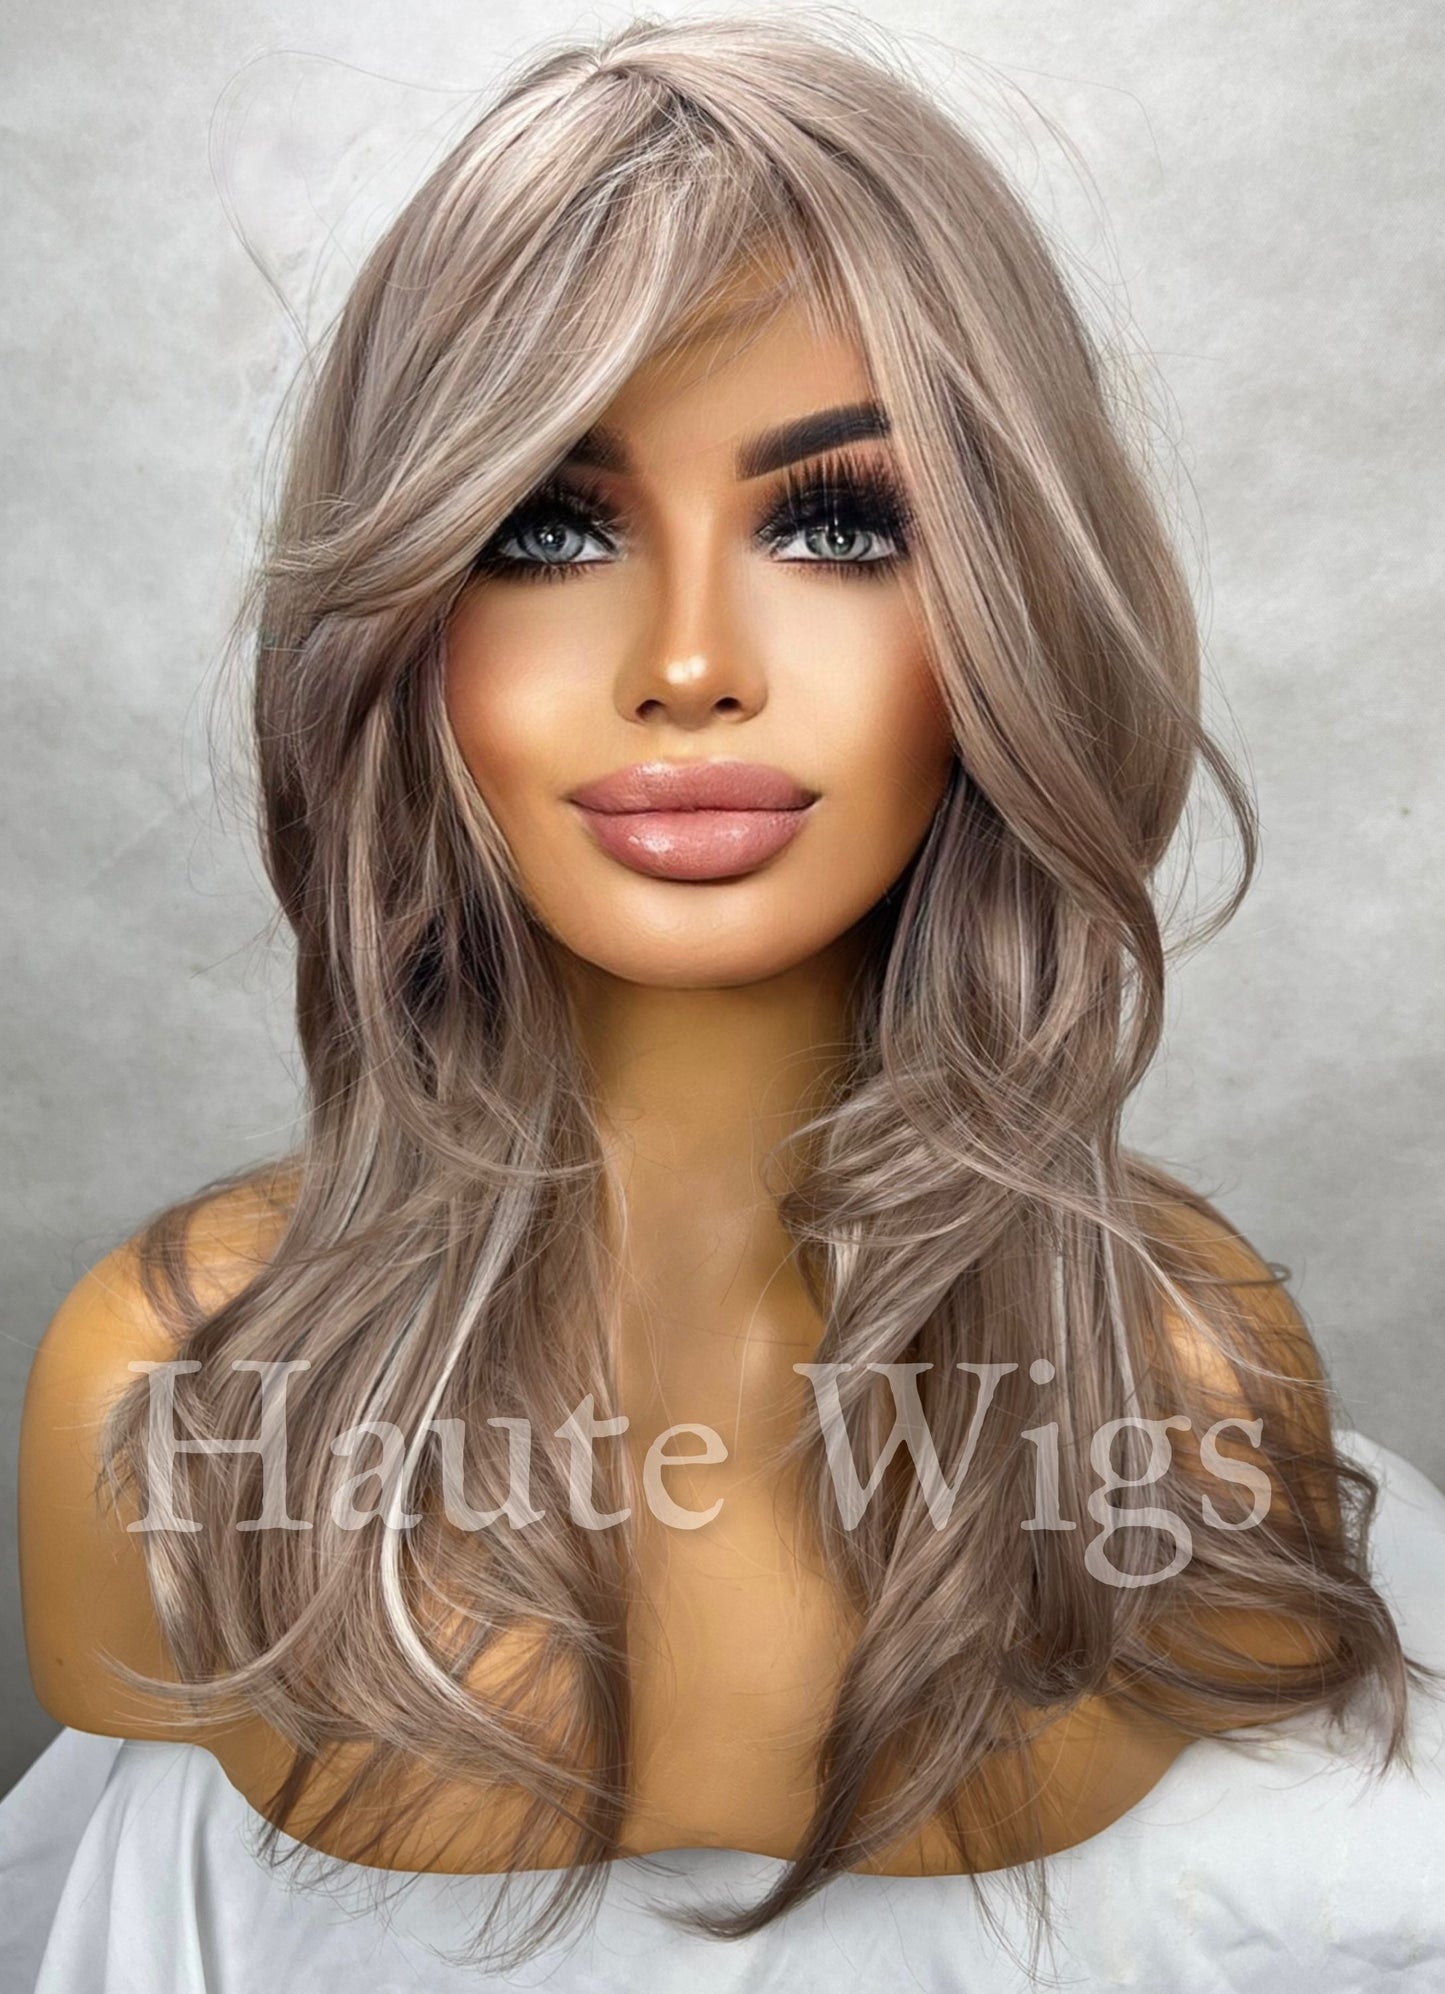 Beau- Platinum Ash Blonde 14" Bob Wig White Silver Tones layered Classy No Lace Front with bangs fringe Womens gift for her Short haute wigs